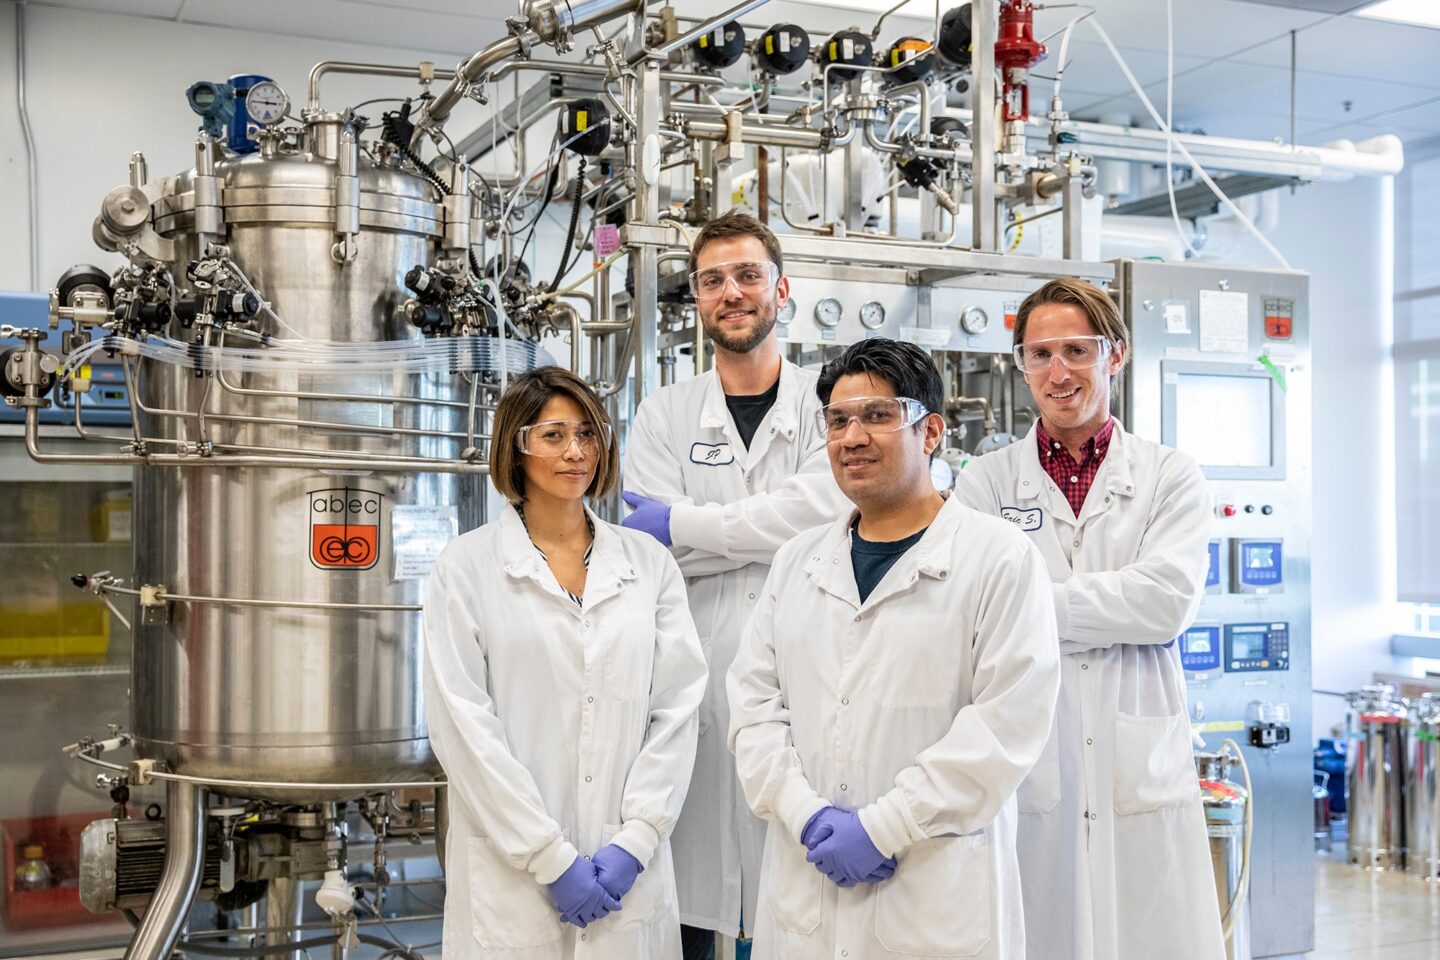 Nina Reyes (left) and Dino Athanasiadis (front center) of Checkerspot and Jan-Philip Prahl (back center) and Eric Sundstrom (back right) stand in front of a bioreactor at the ABPDU during optimization testing of their fermentation process.